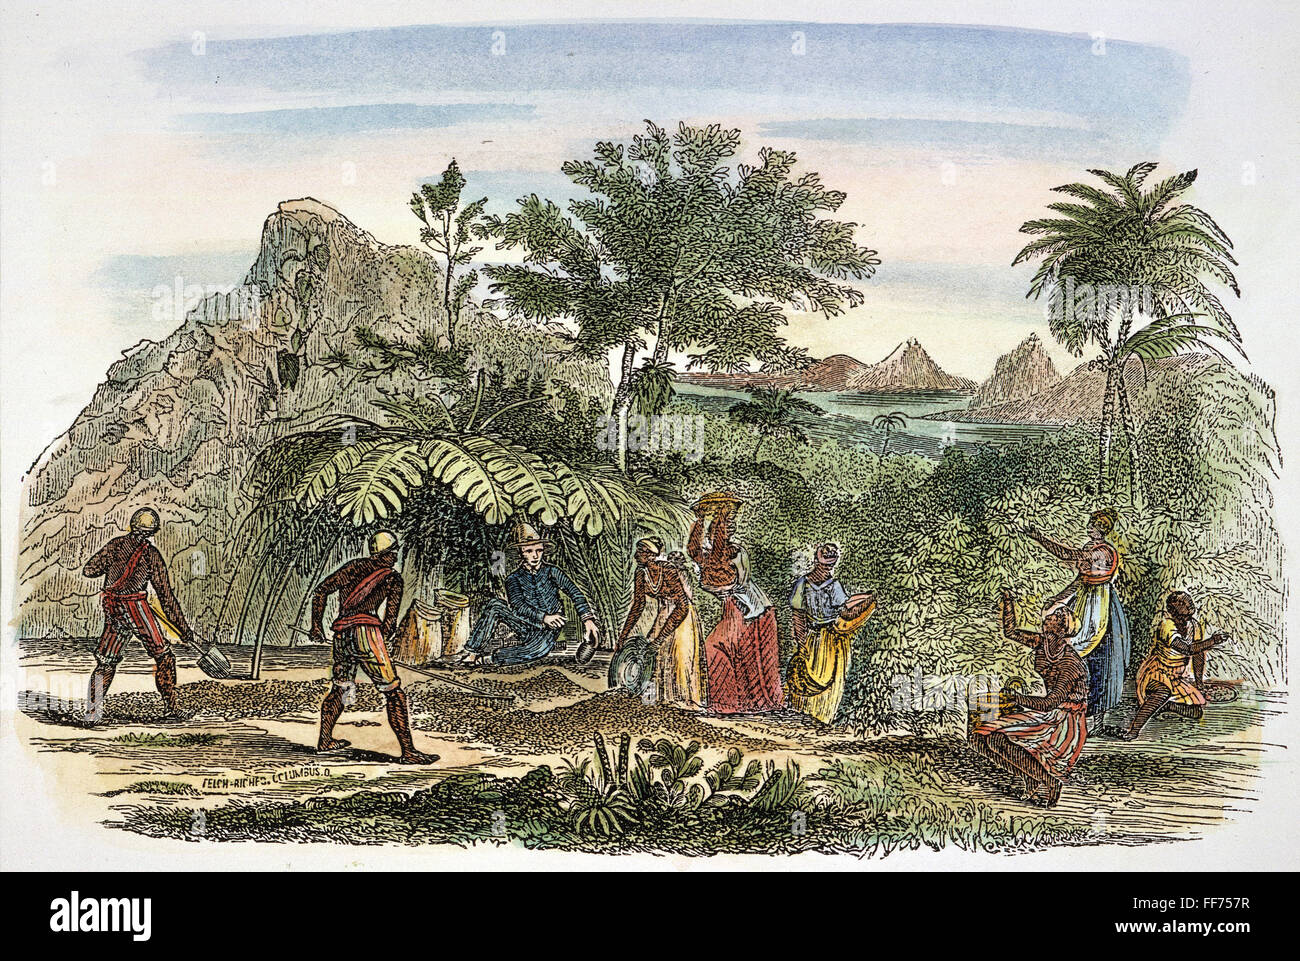 PLANTATION: COFFEE, 1857. /nBlack slaves on a coffee plantation in the Brazilian highlands. Engraving, 1857. Stock Photo